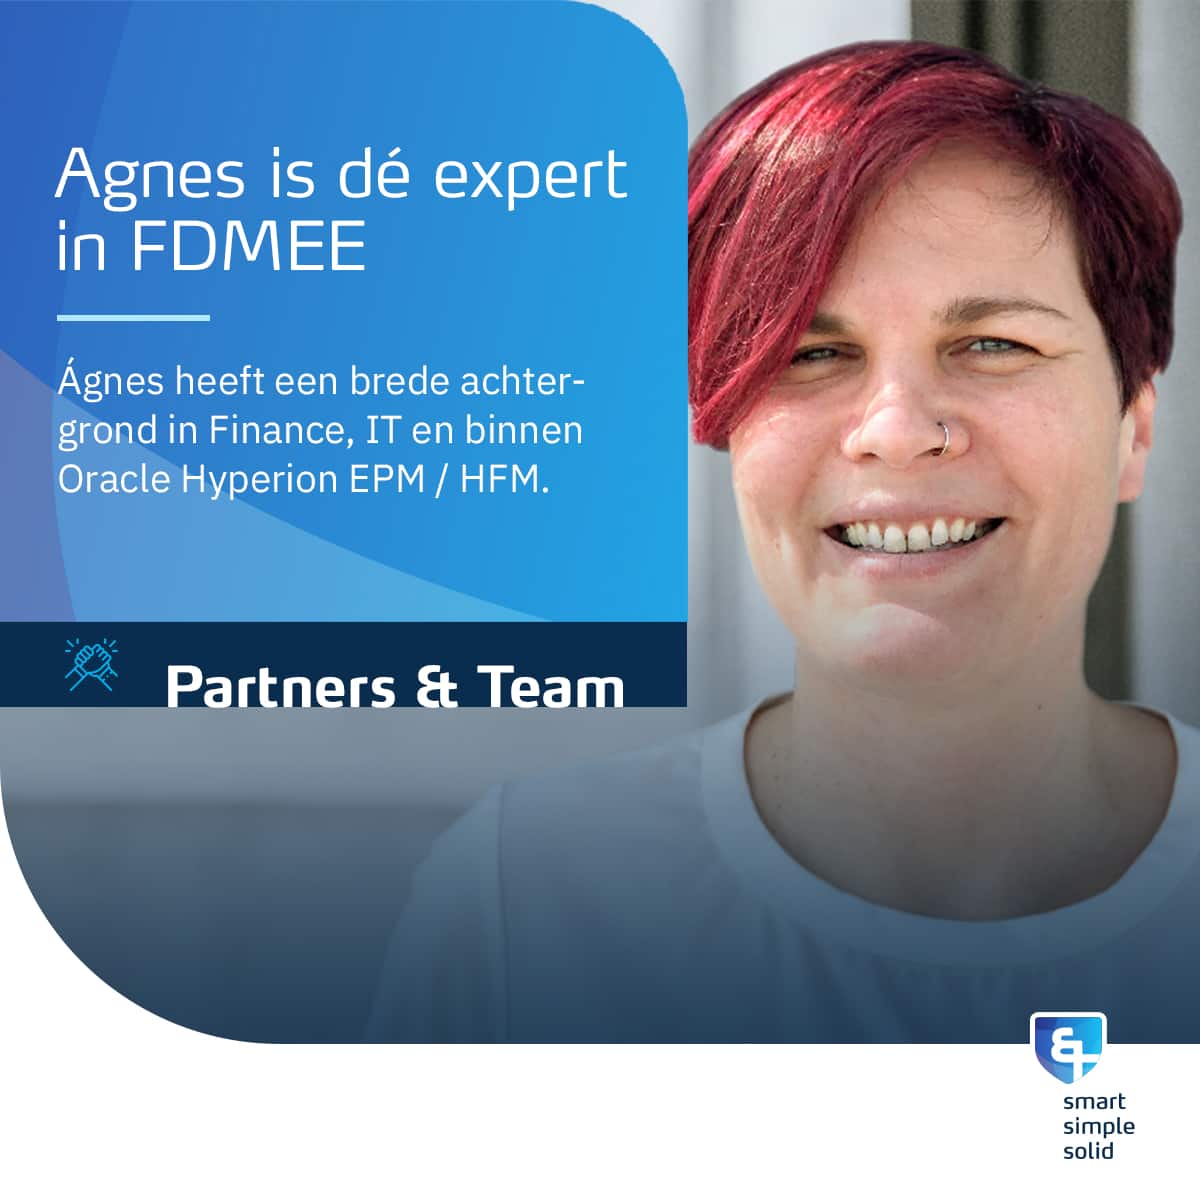 Agnes is the expert in FDMEE